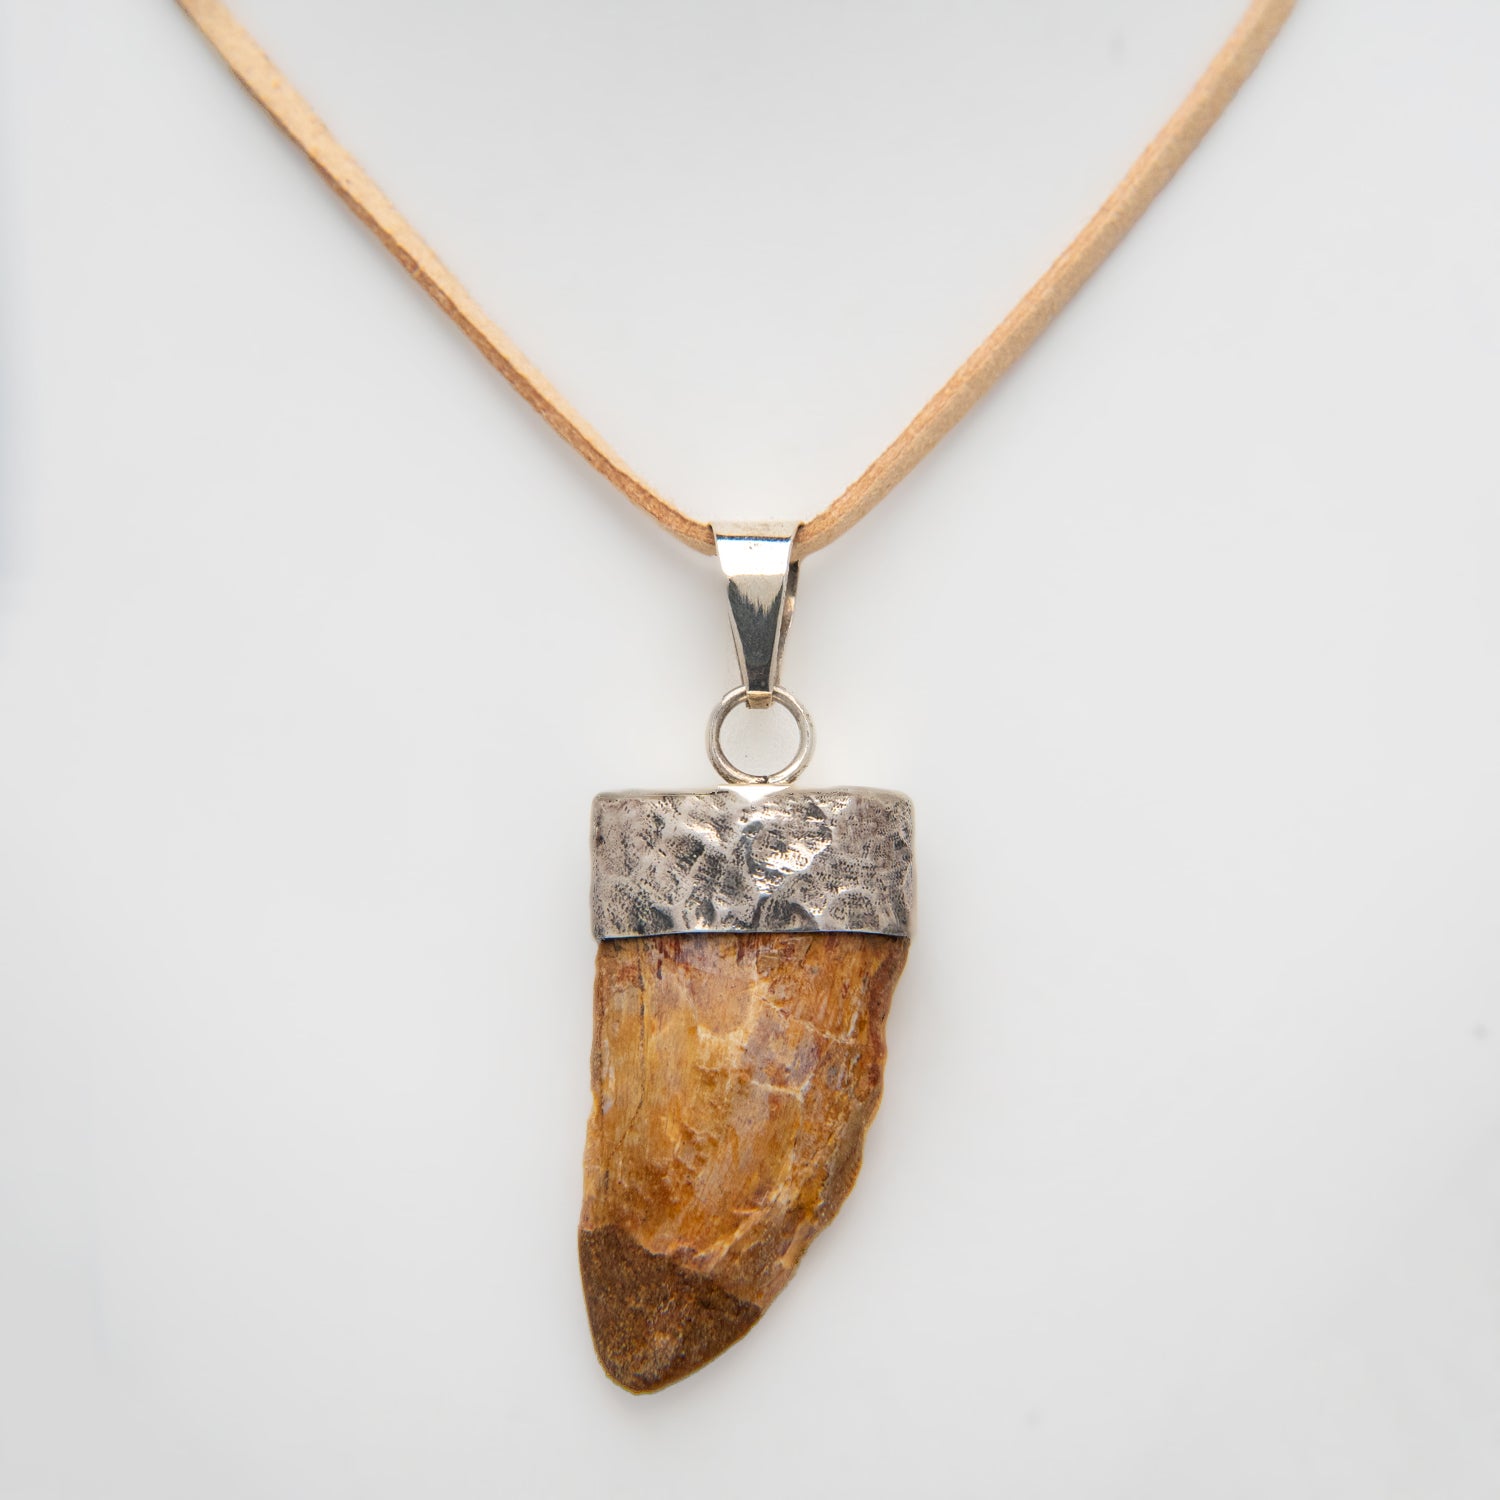 Genuine African Tyrannosaurus Rex Tooth Pendant on Leather Cord